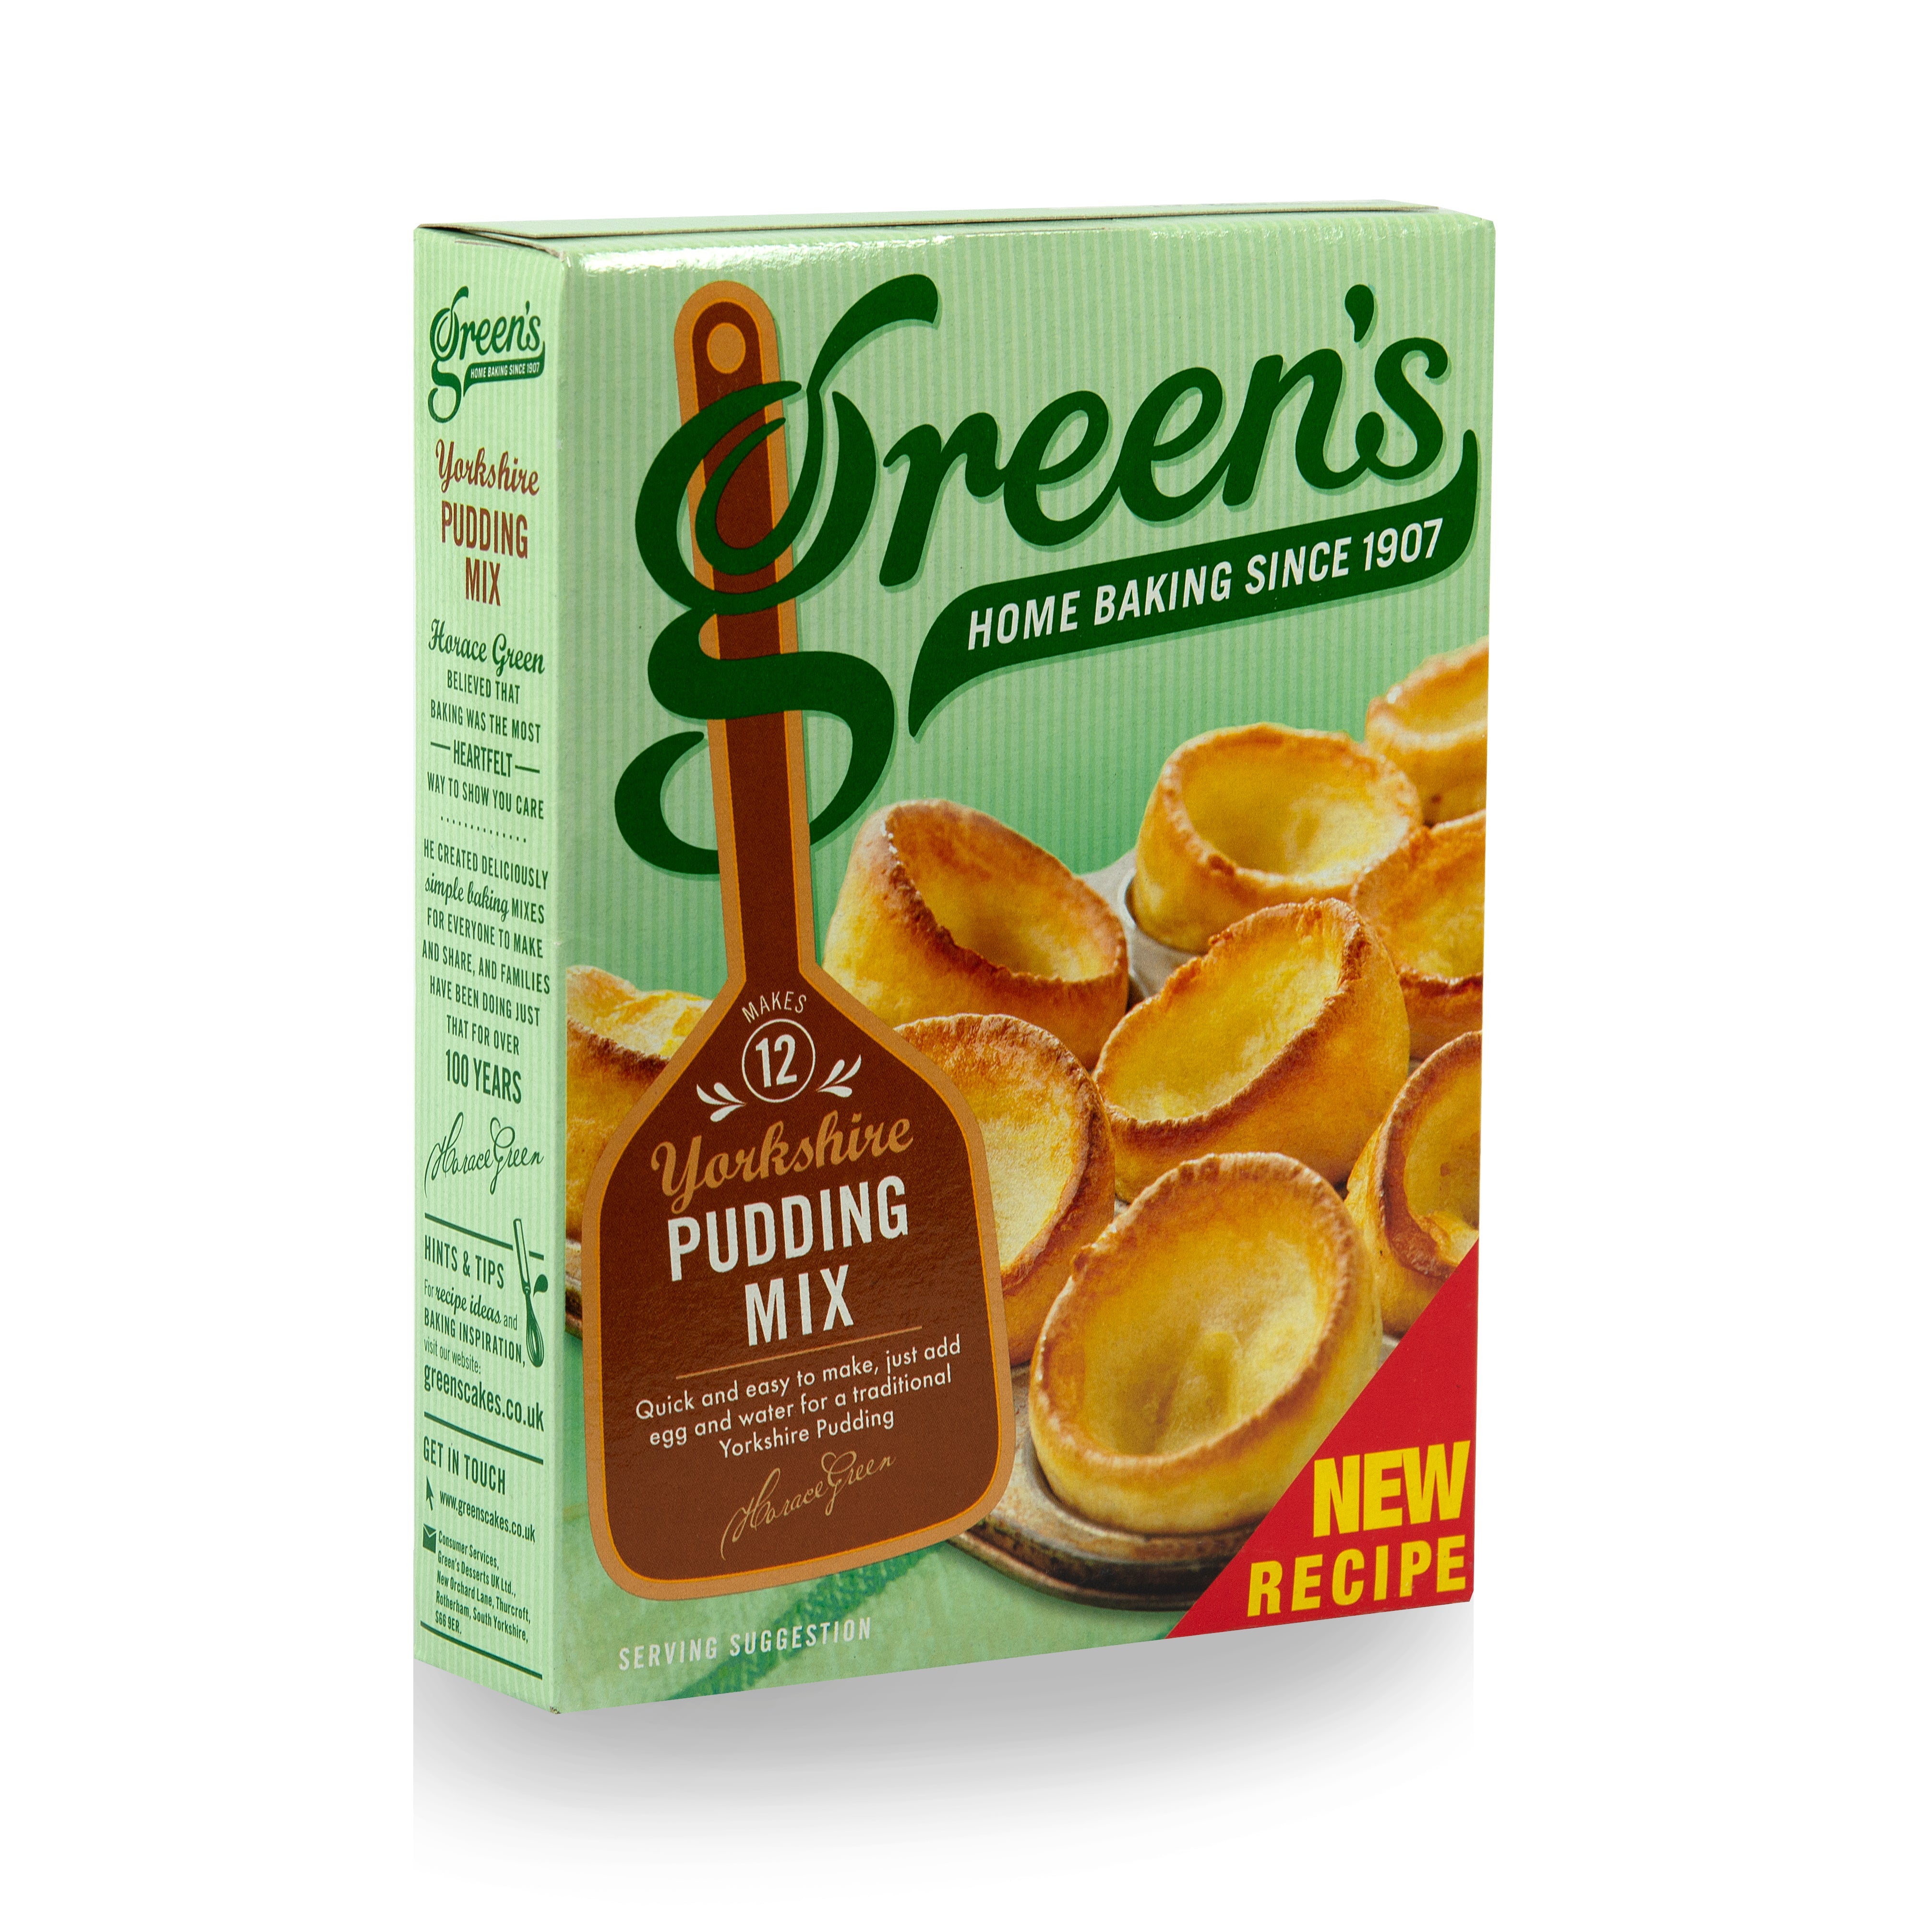 Green's Yorkshire Pudding Mix 125g - Pack of 6